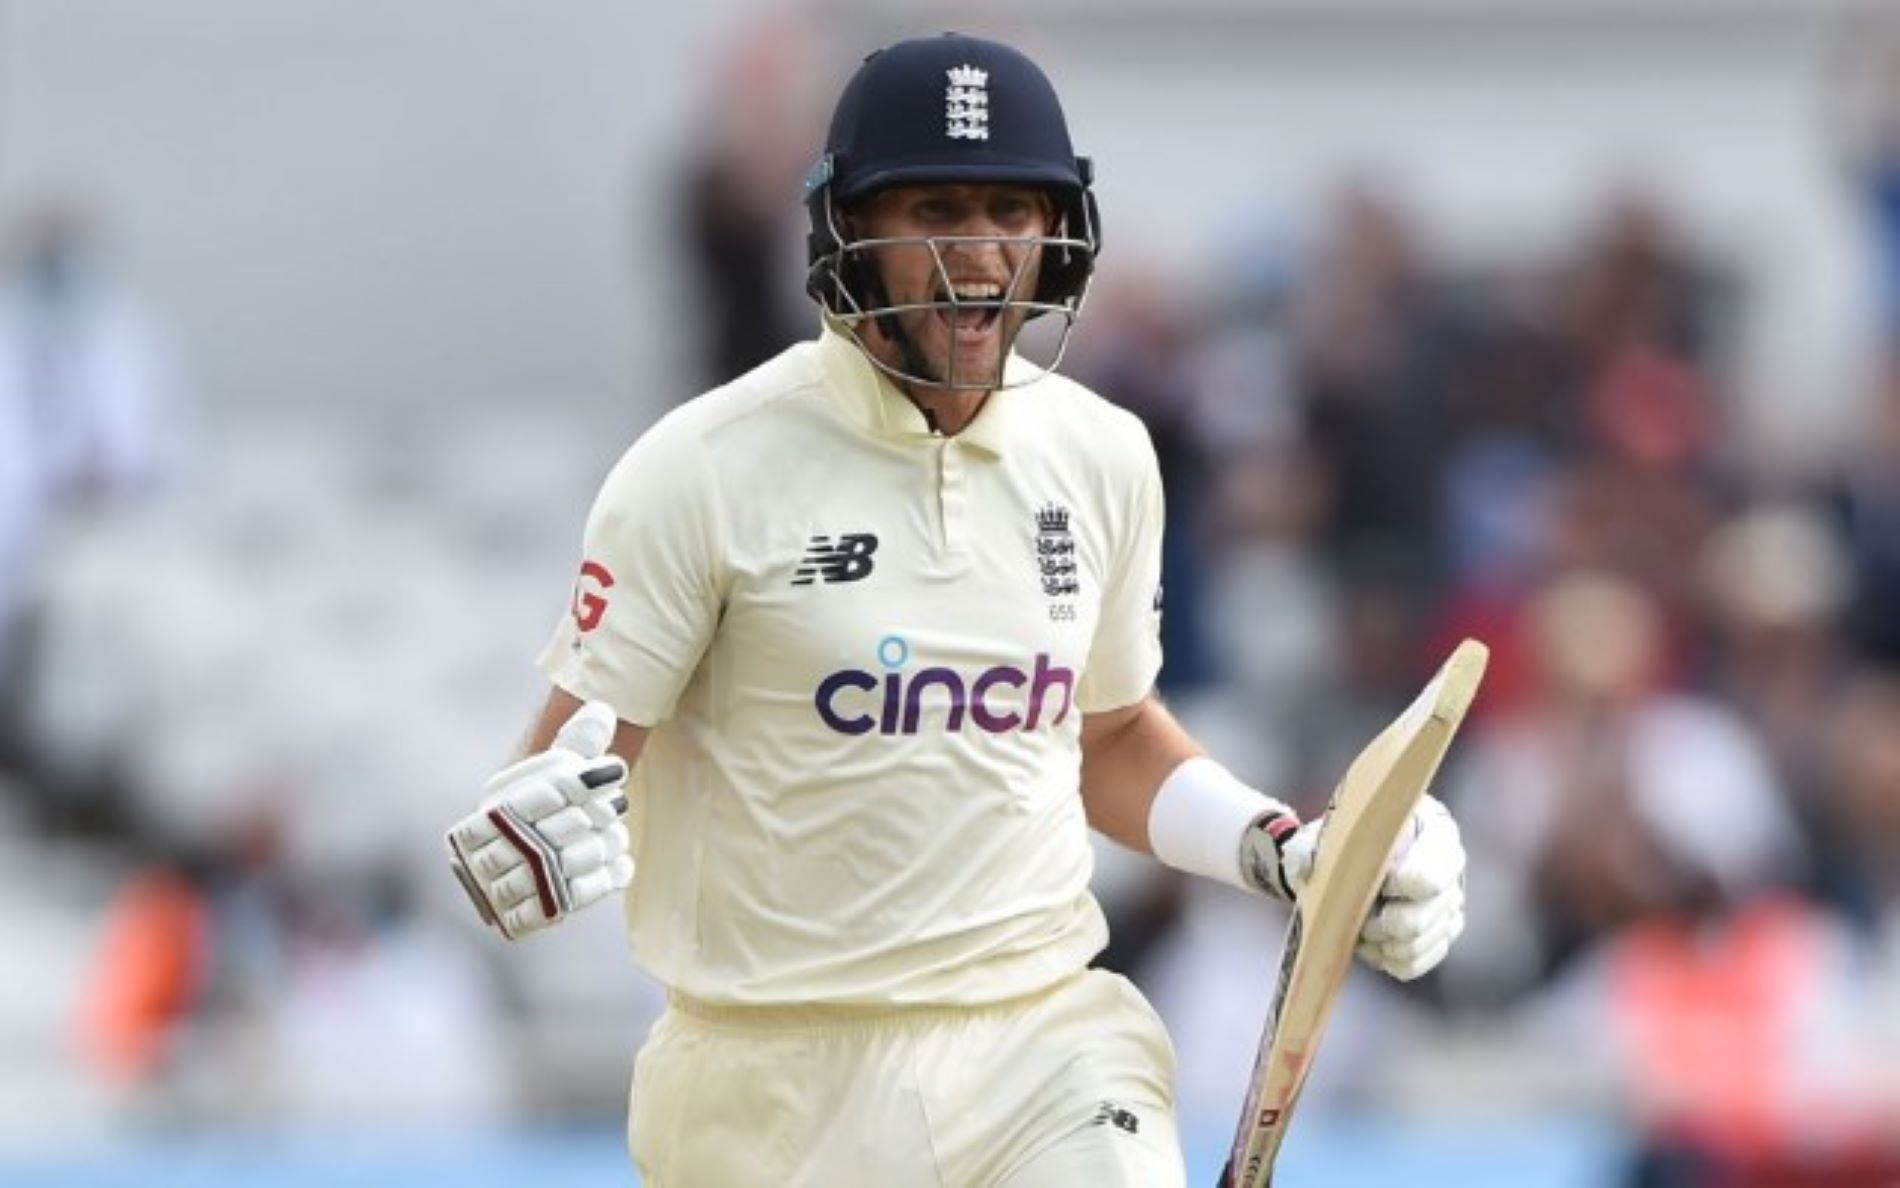 Joe Root was the leading run-scorer in the WTC cycle